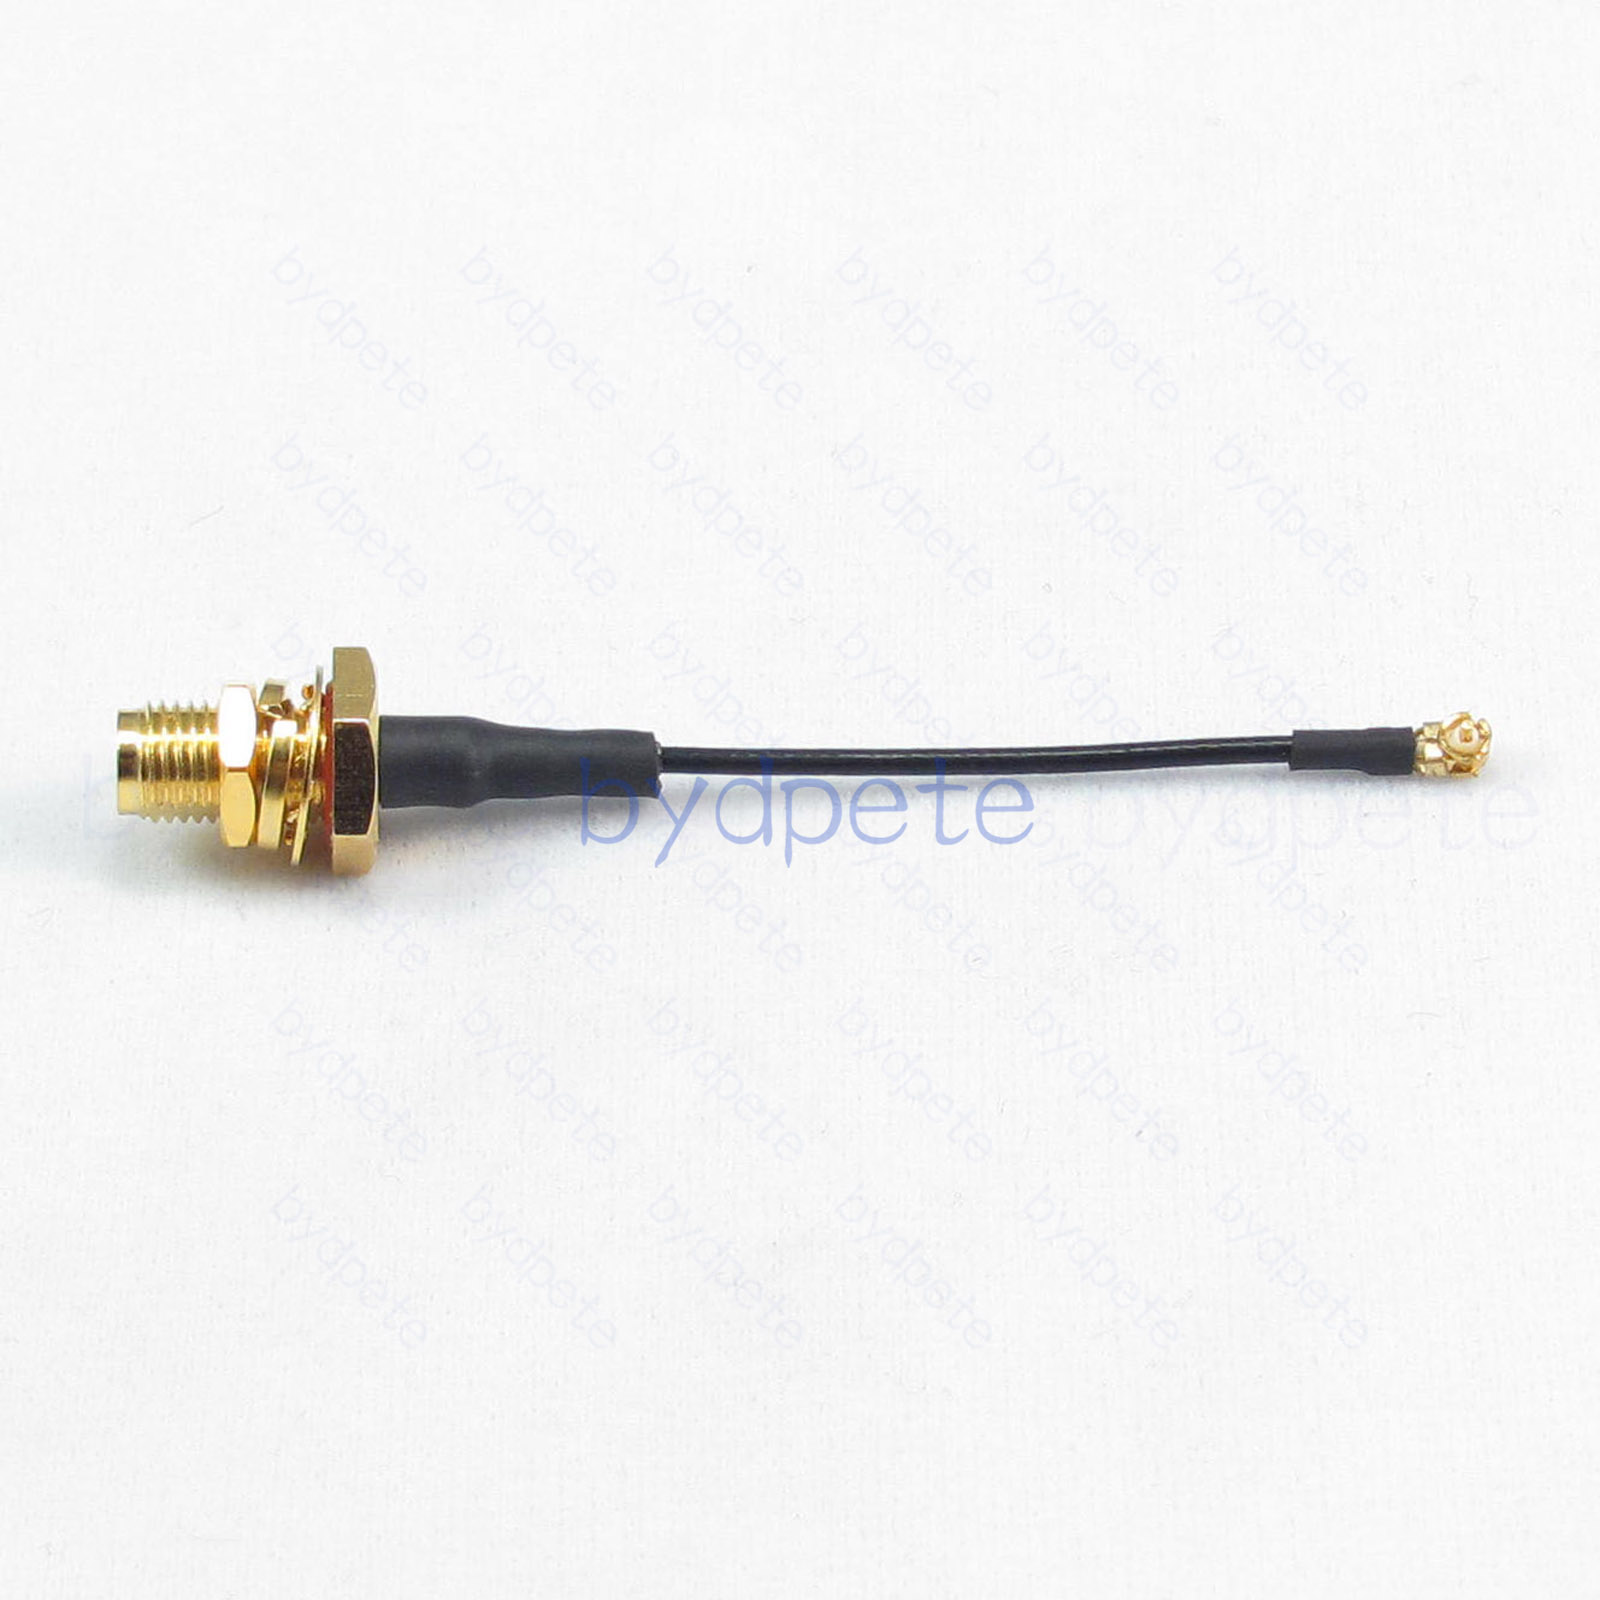 MHF SW-23 SW23 Micro RF coax to SMA female bulk head 1.37mm cable 50ohm IPX IPEX bydpete